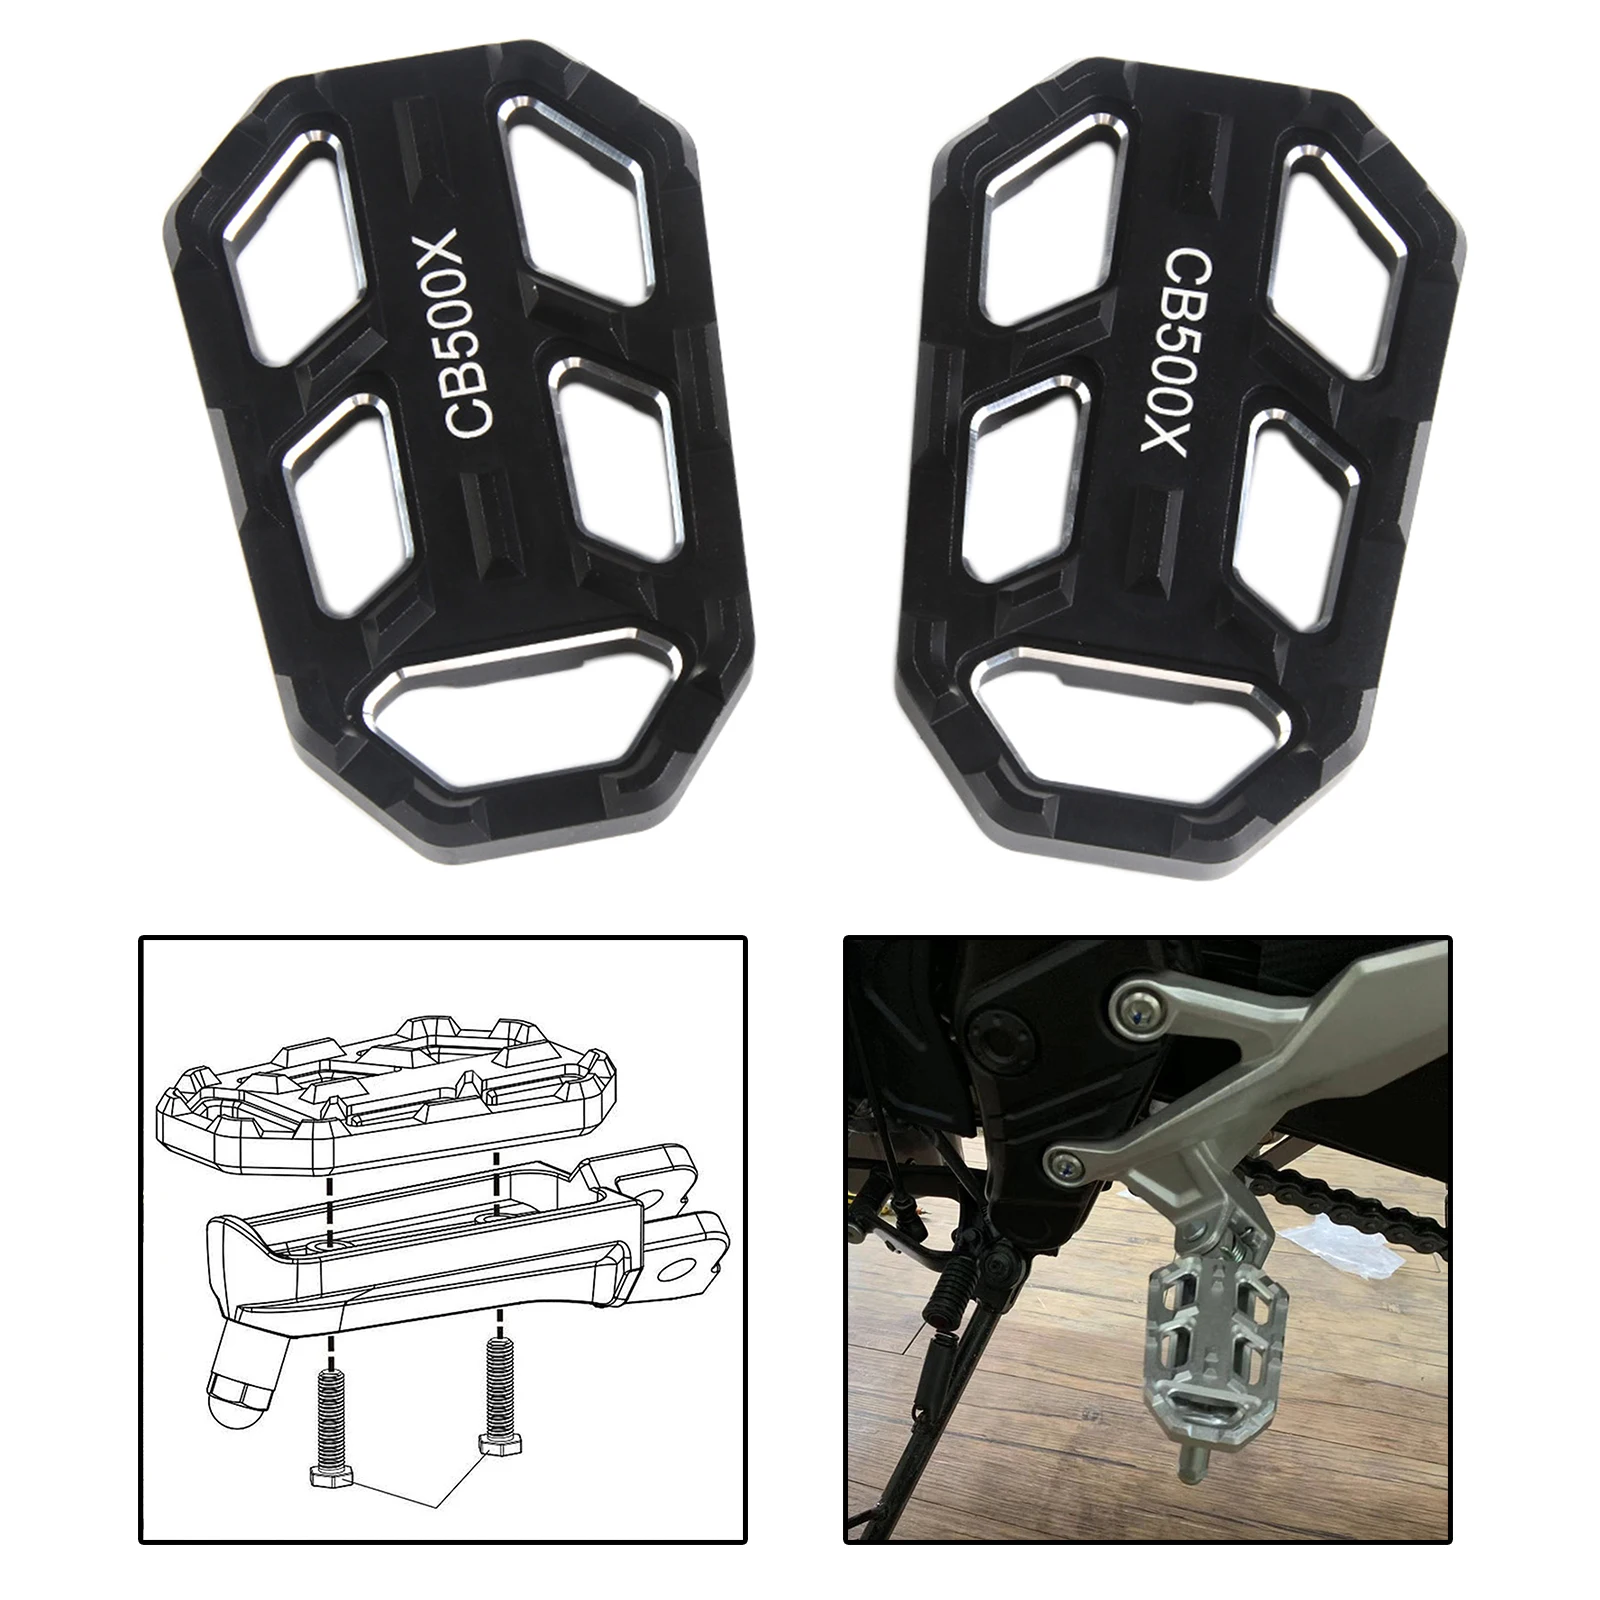 Pedals Rest Footrests for Honda CB500X, Professional Accessories, Replacement